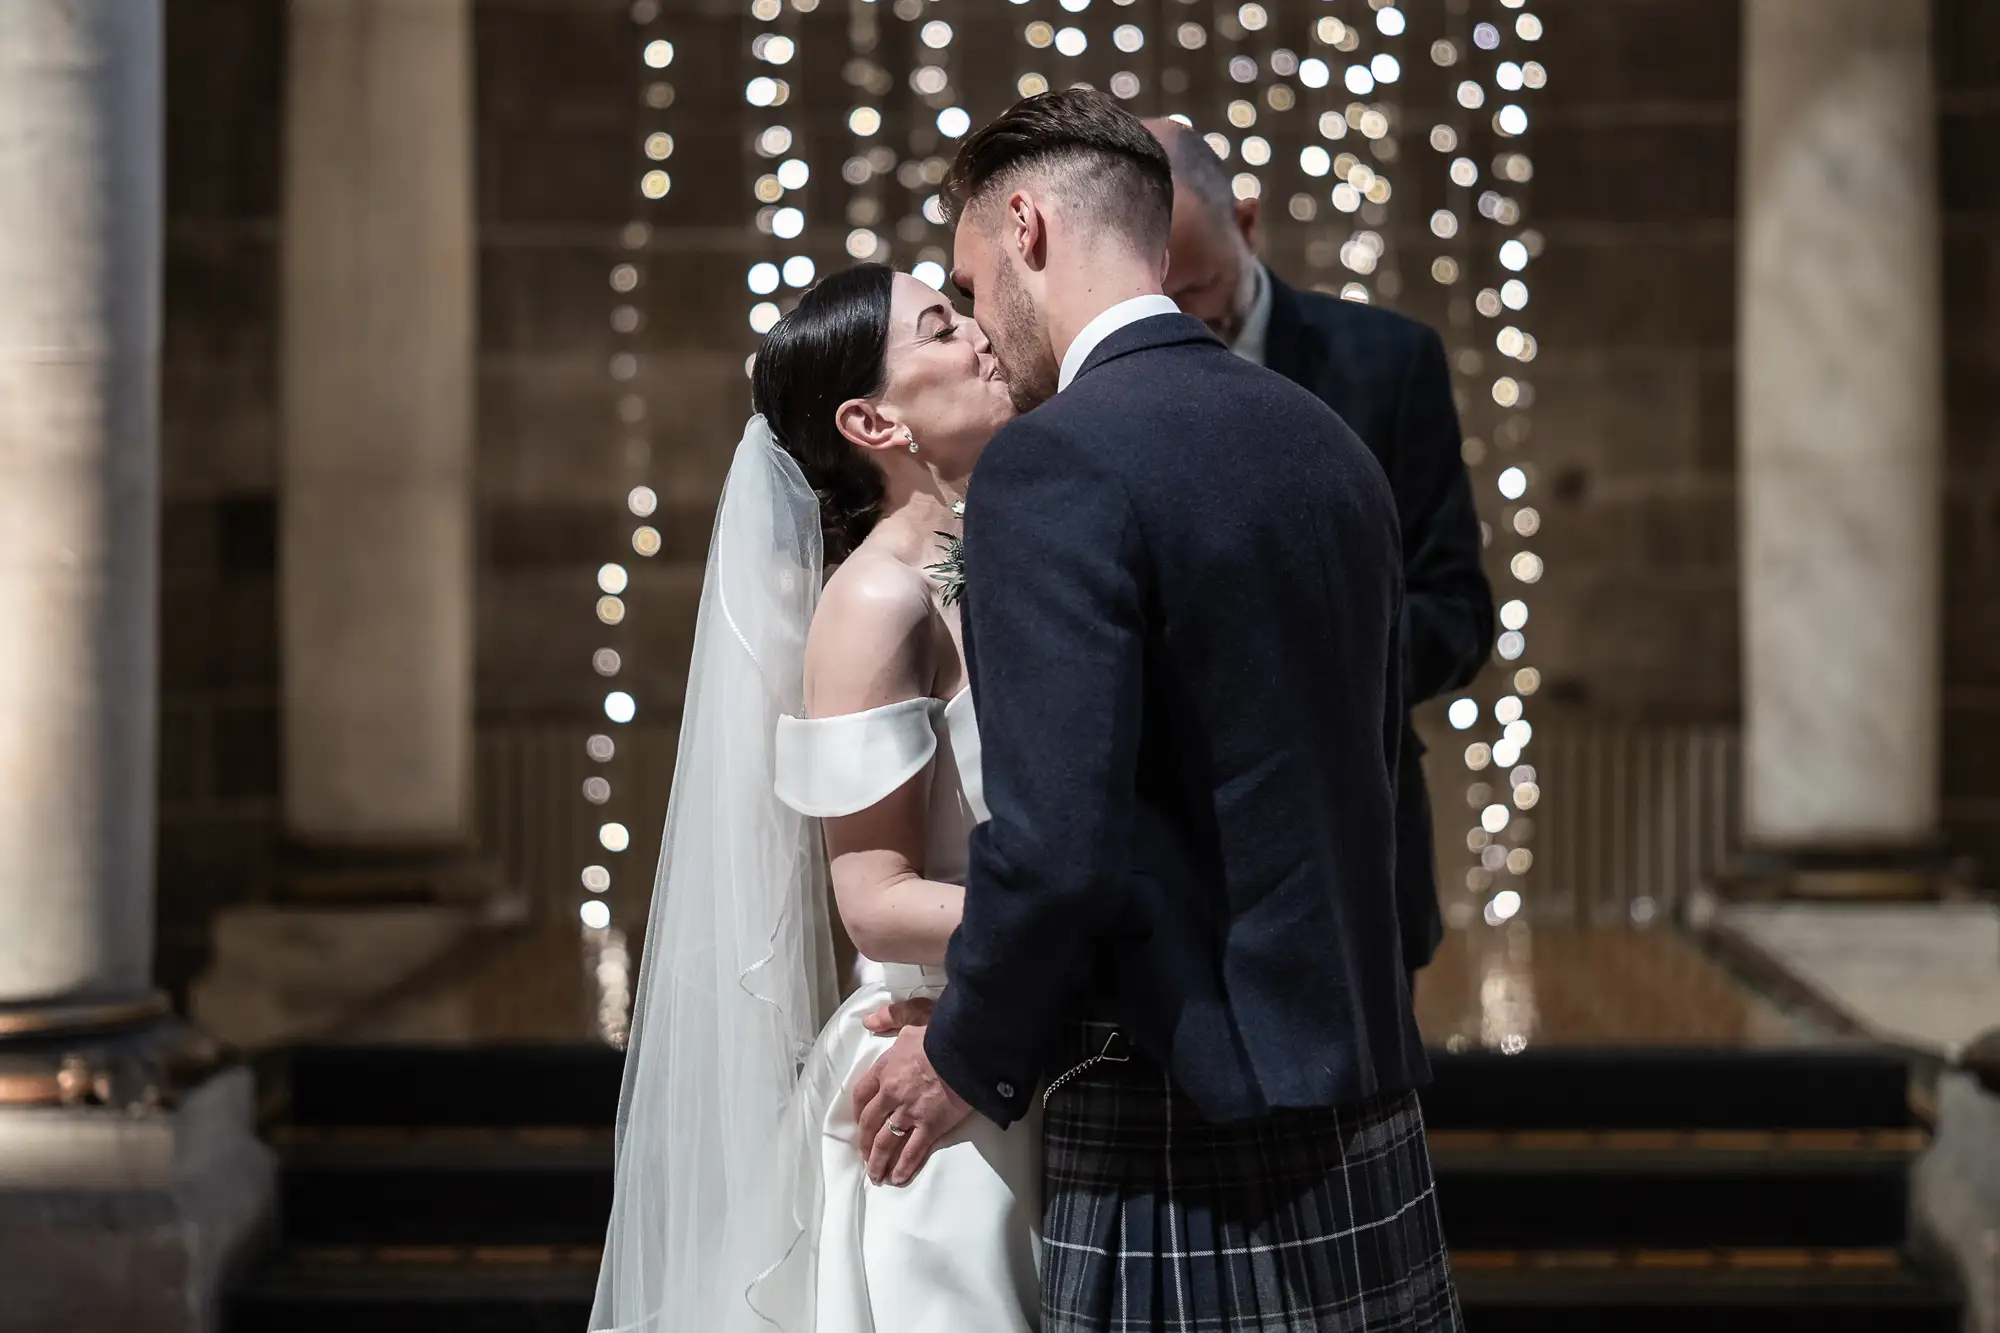 Bride and groom kissing in a church adorned with string lights, the bride in a white dress and veil, and the groom in a kilt and jacket.